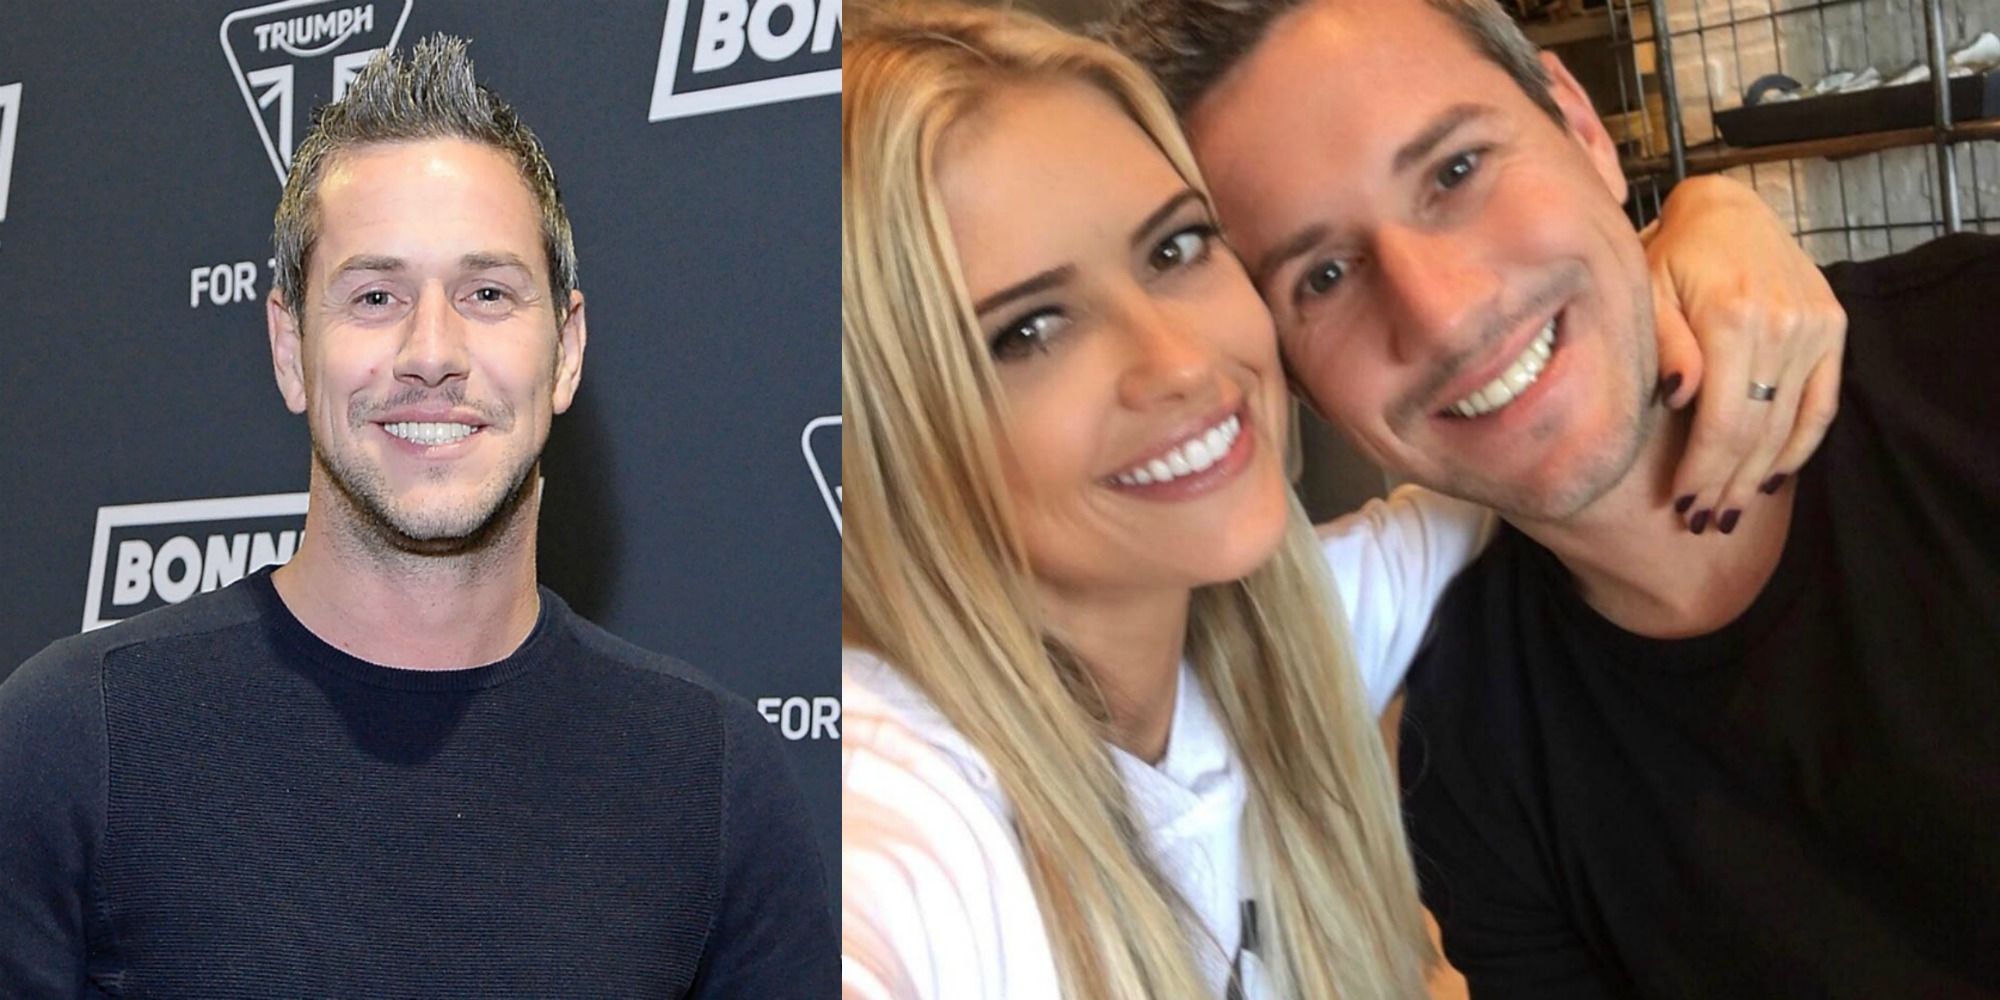 Flip or Flop's Christina Hall and Ant Anstead's divorce - what